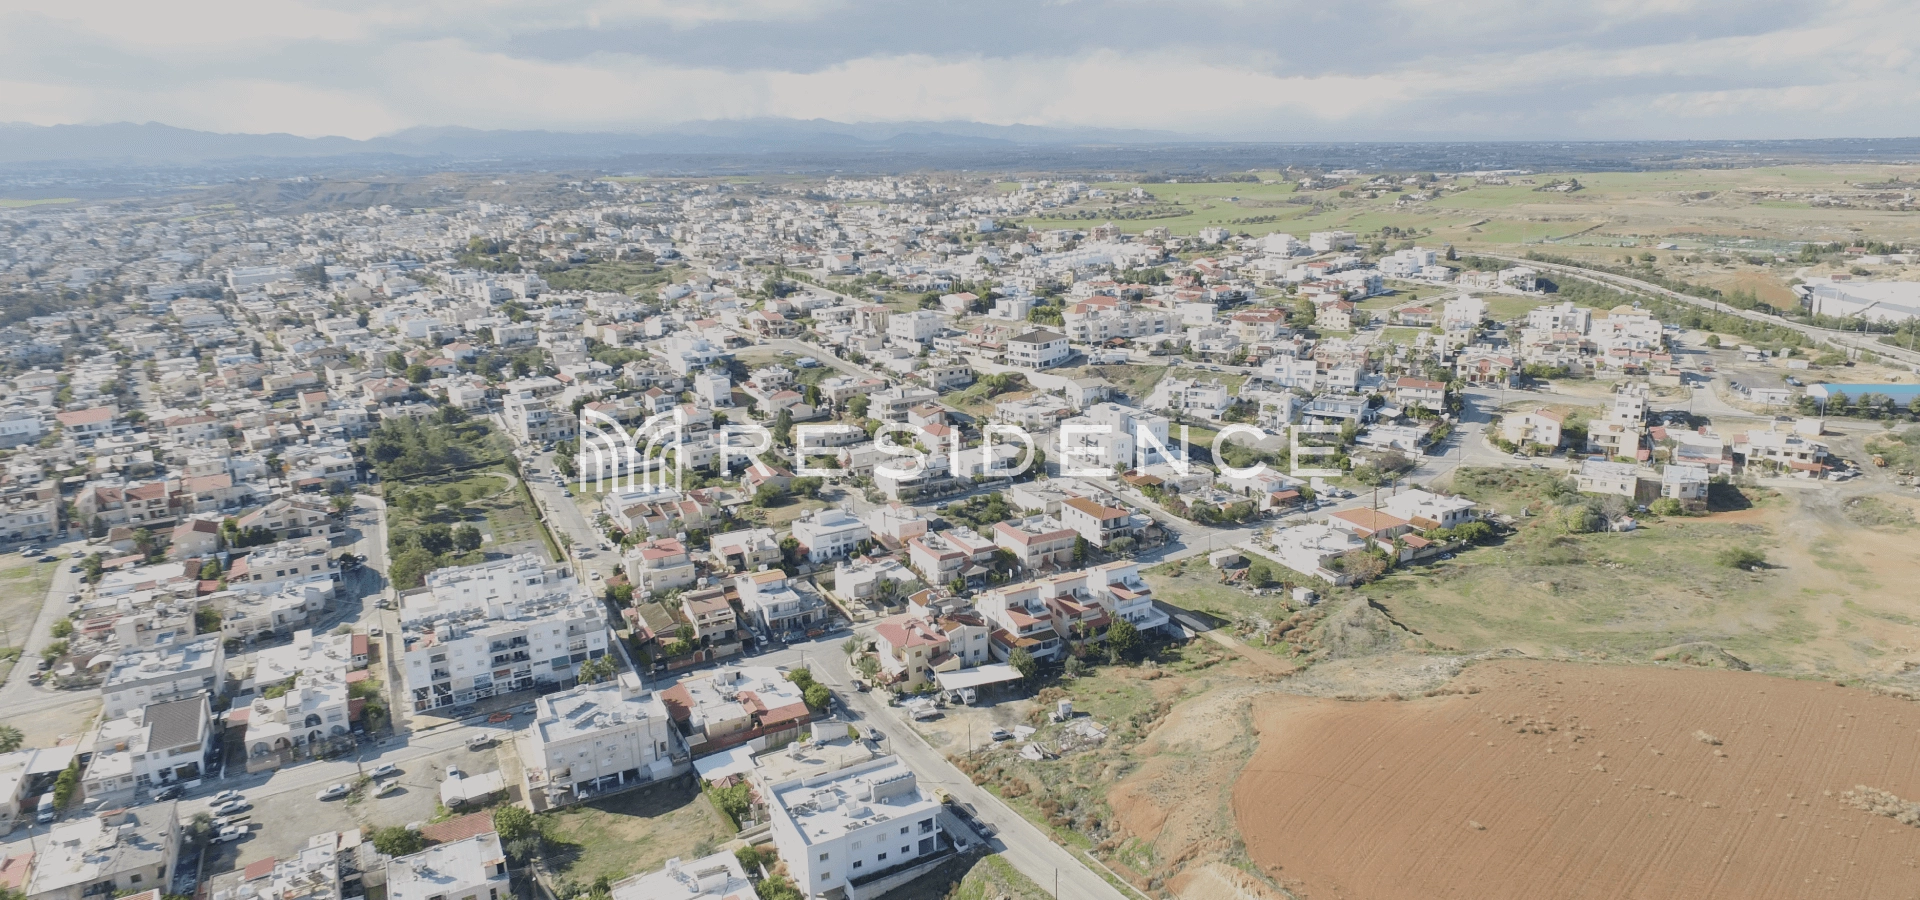 2,546m² Residential Plot for Sale in Ilioupoli, Nicosia District